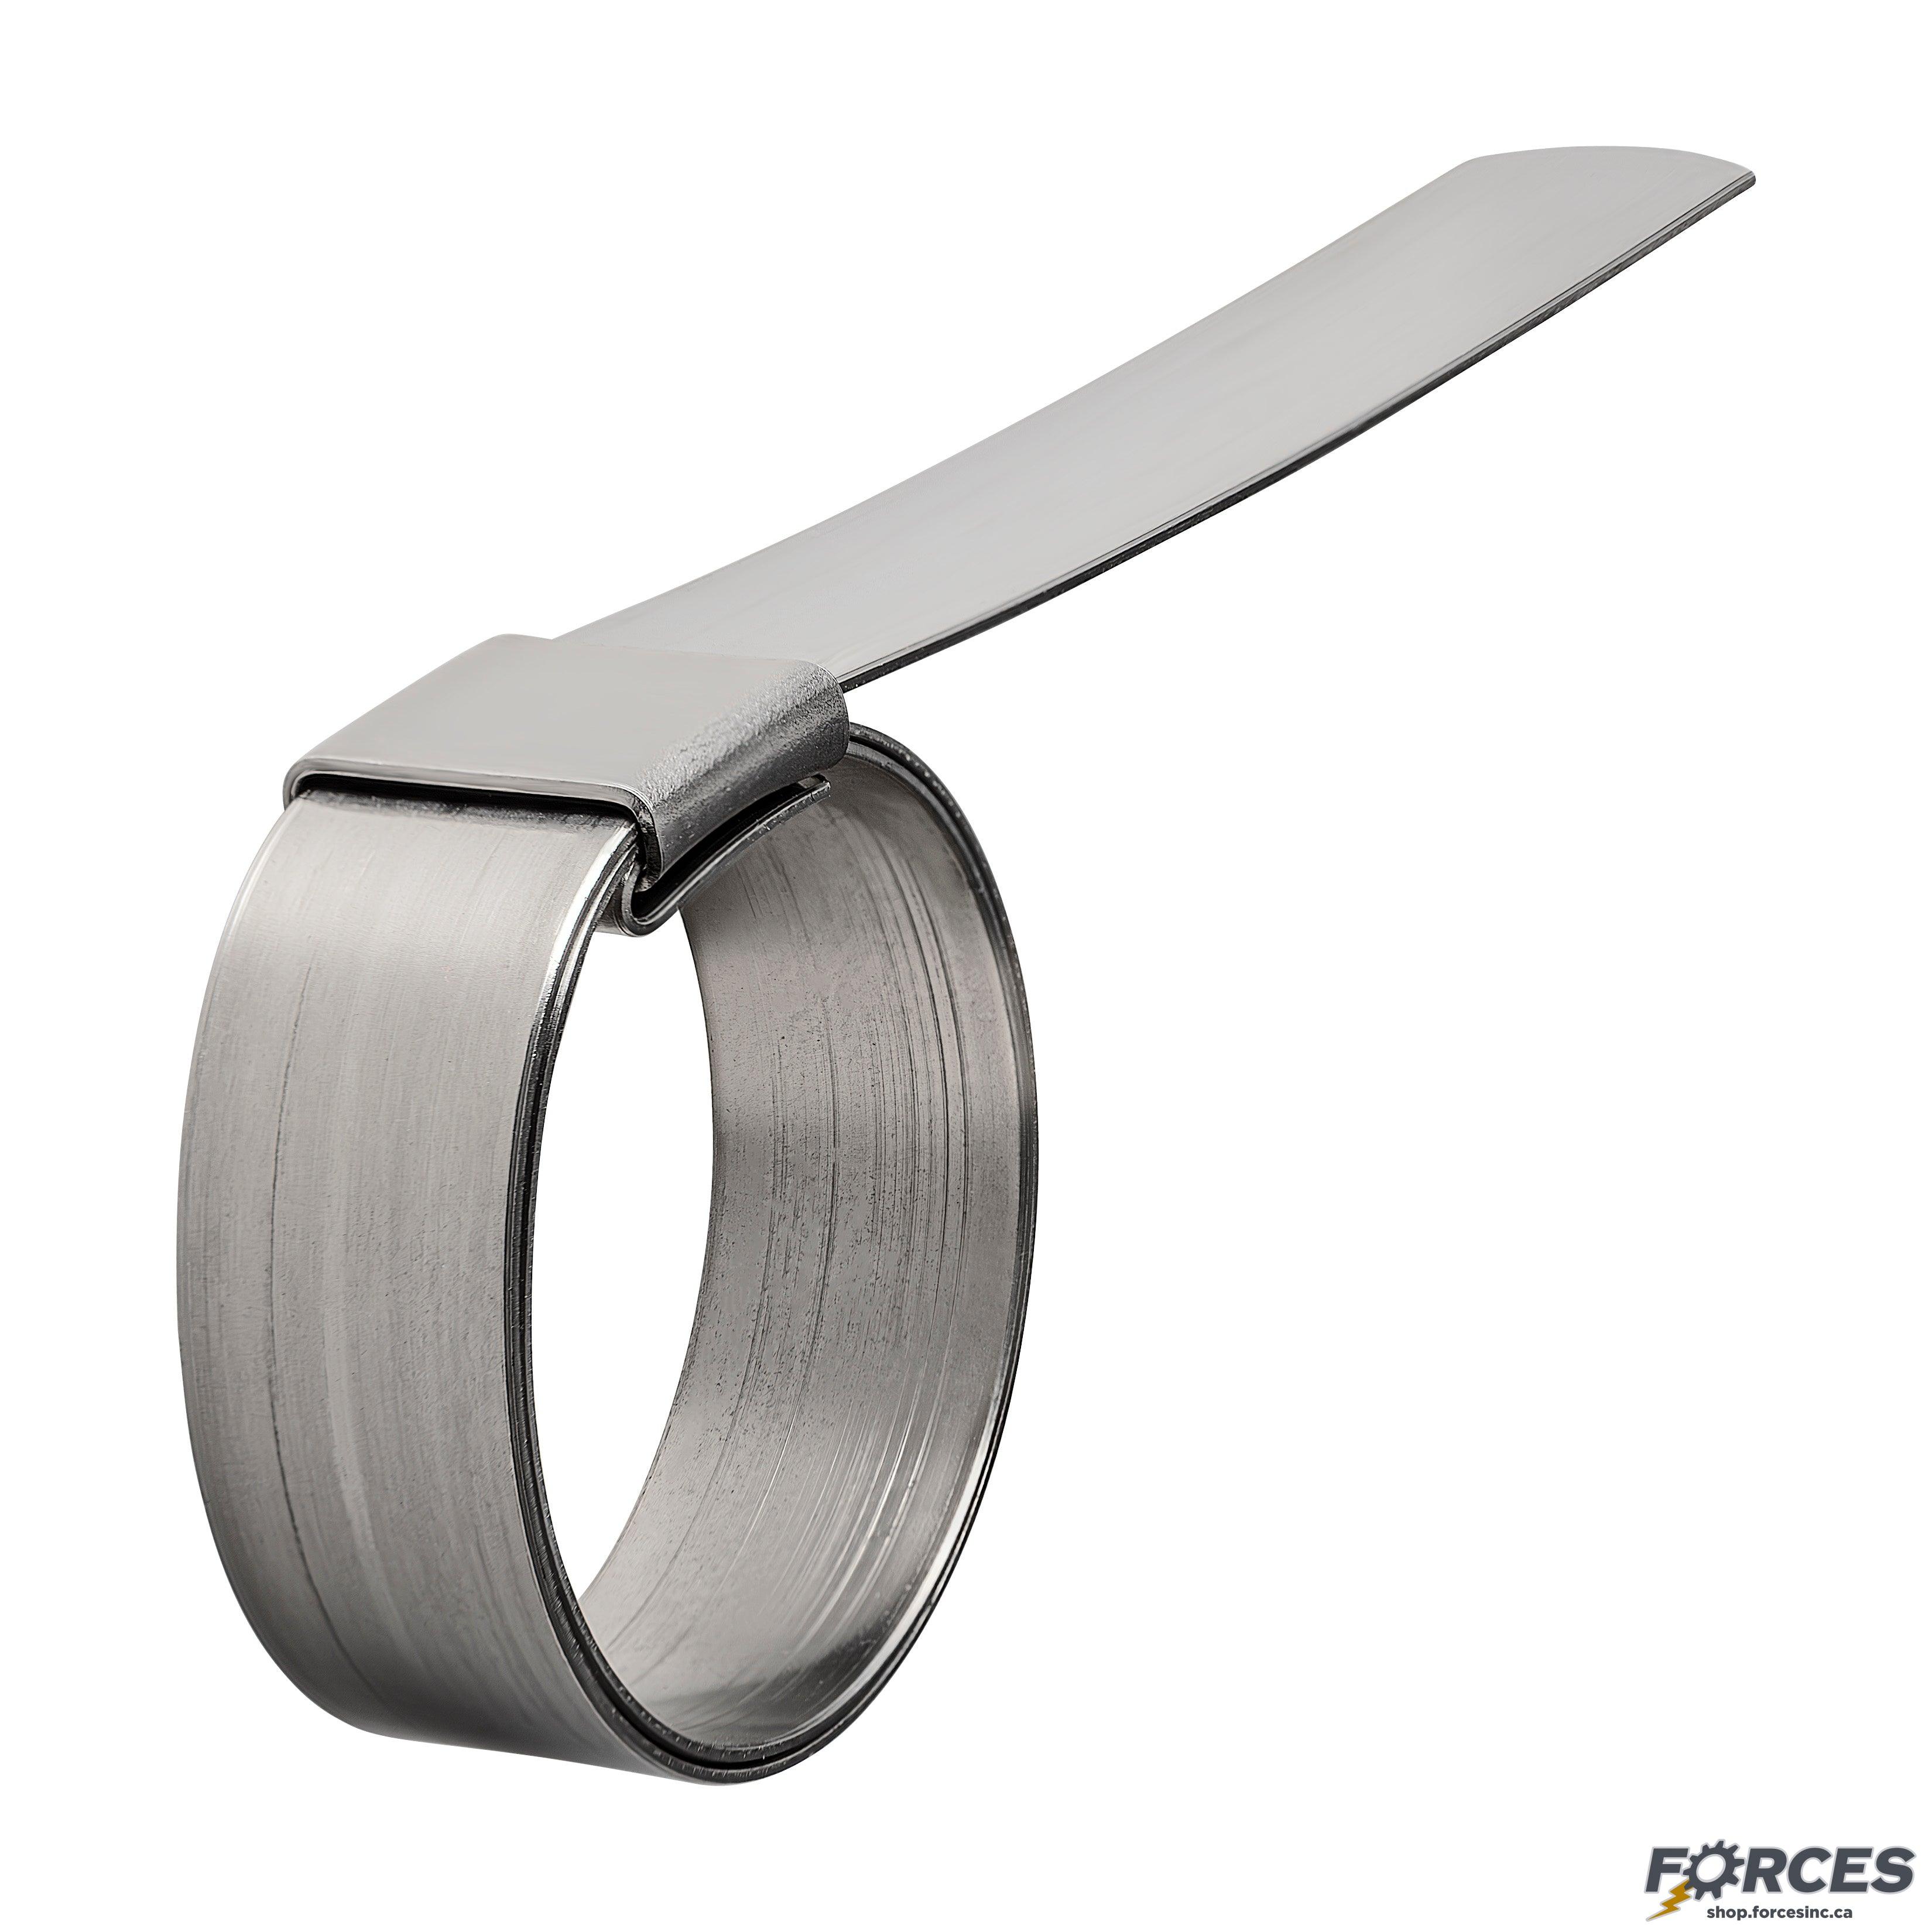 1" Center Punch Band Clamp - Stainless Steel 304 - Forces Inc